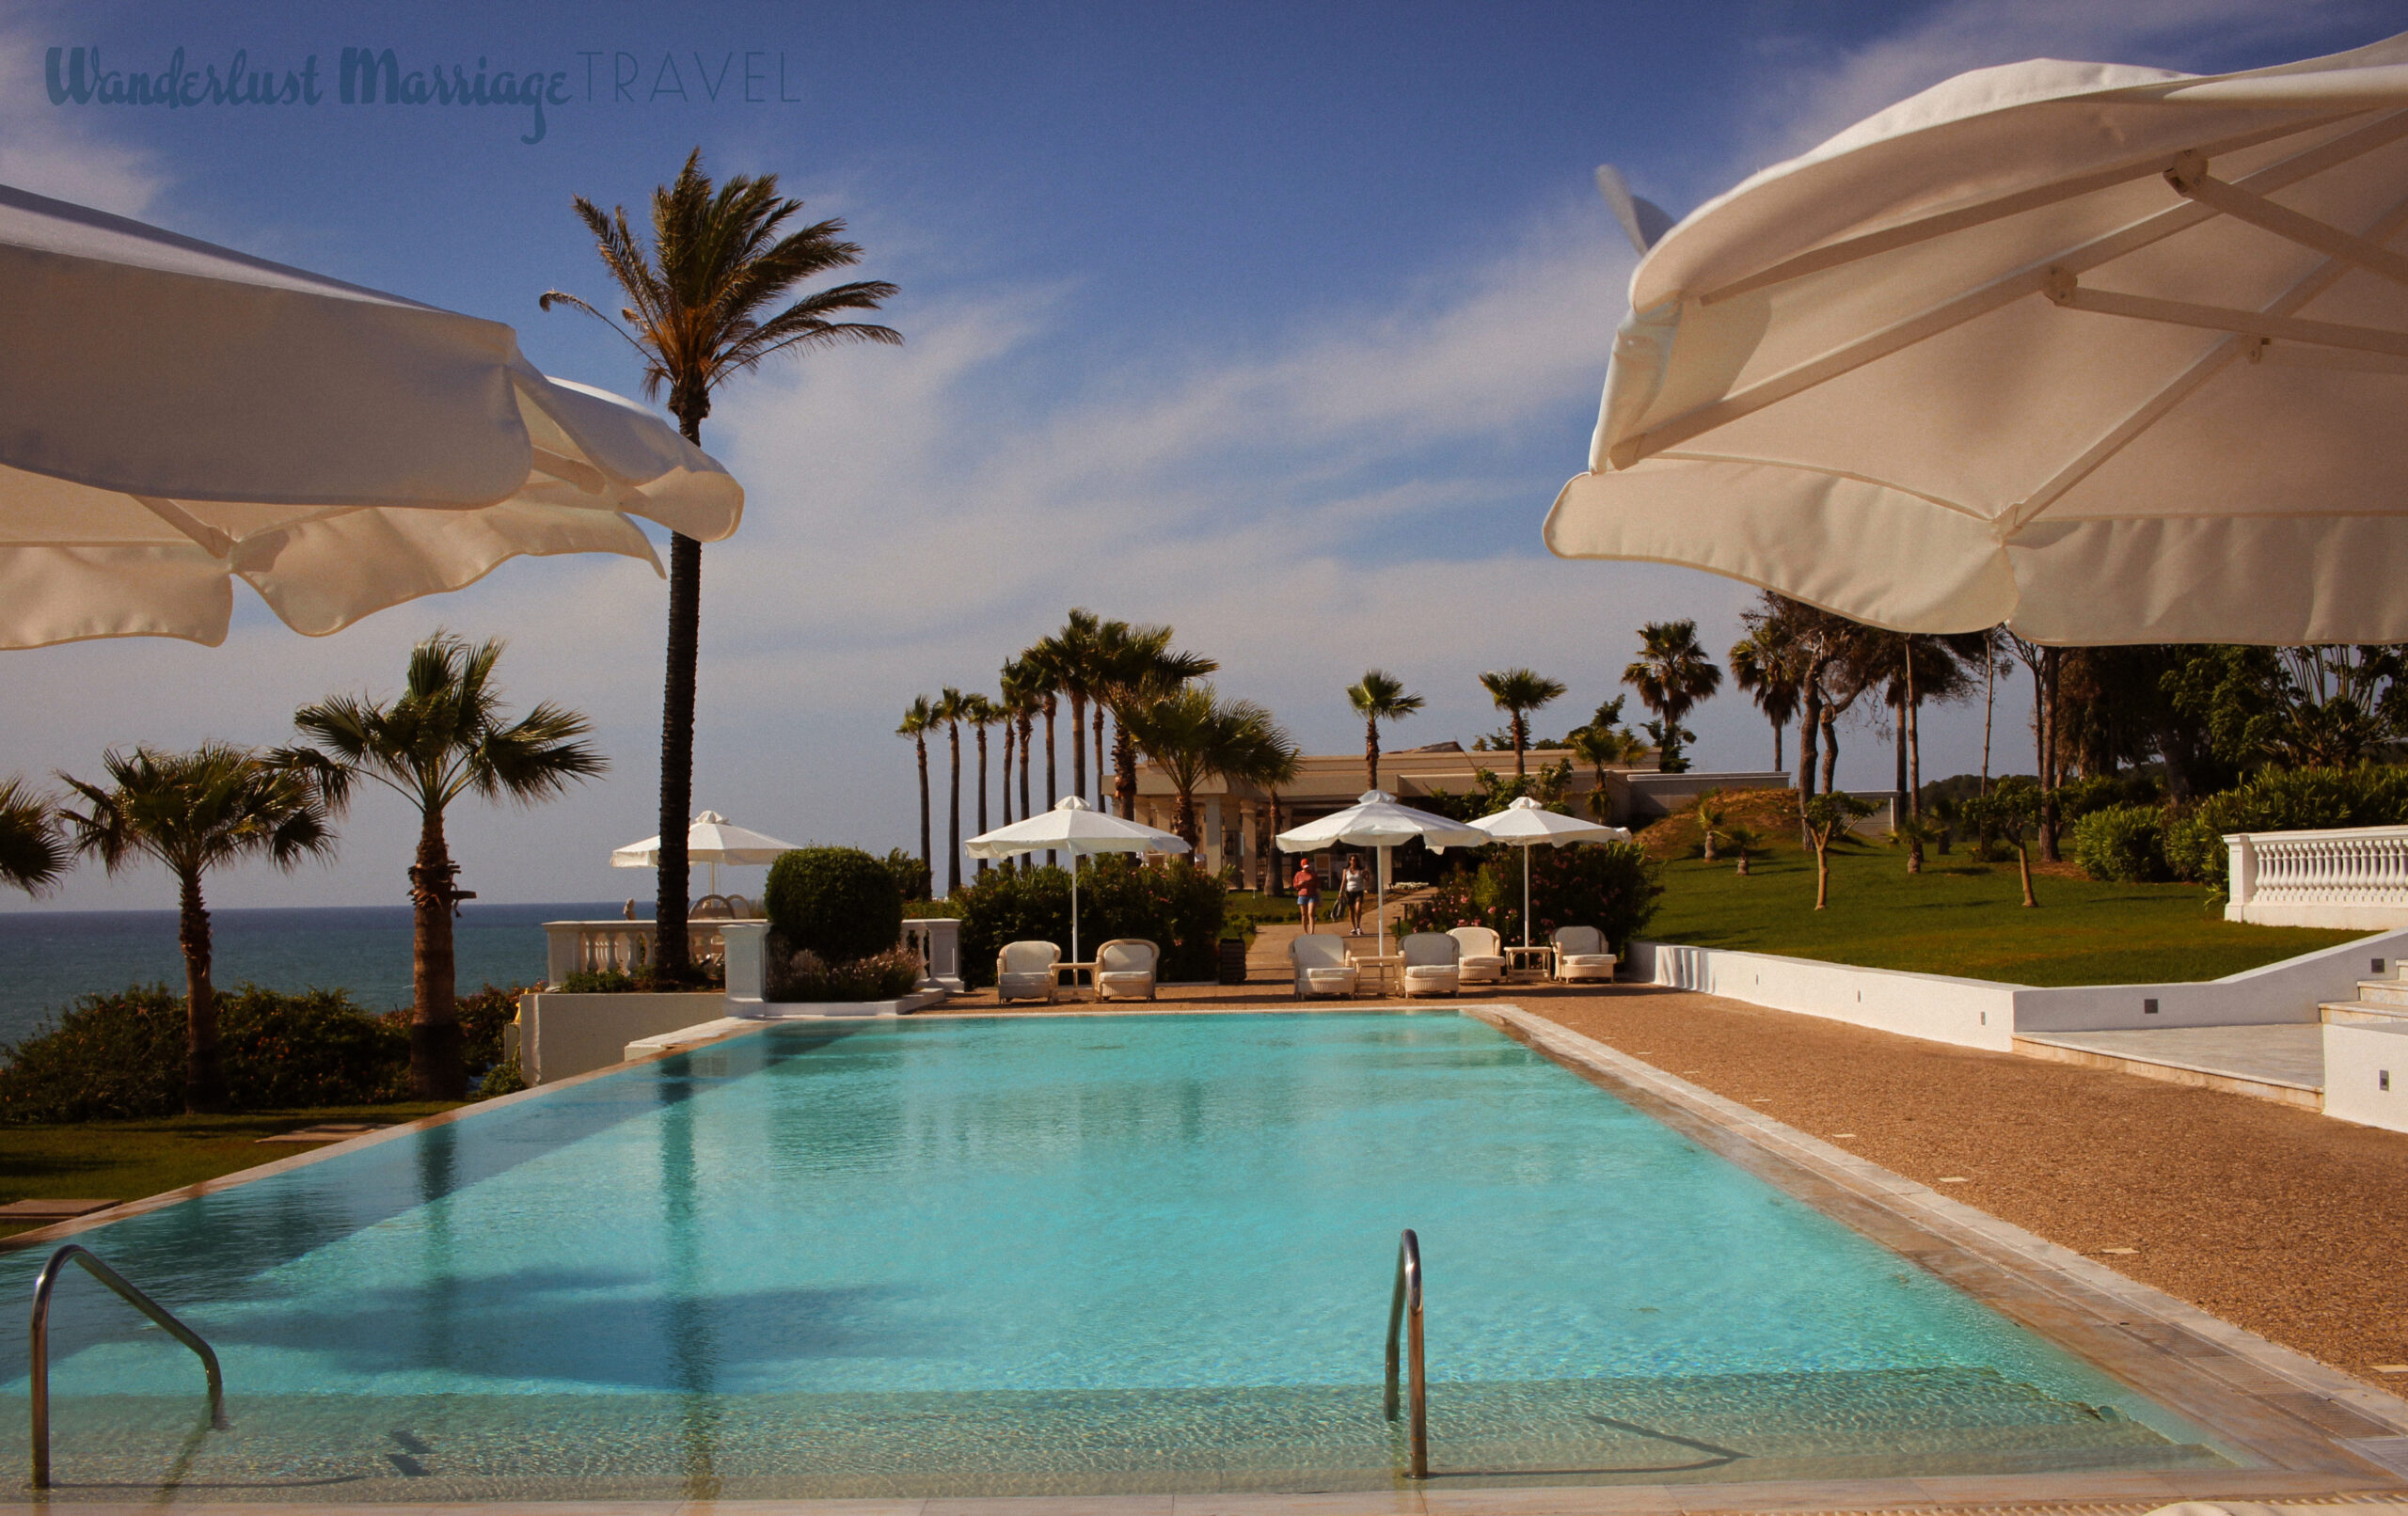 Crystal blue swimming pool, with umbrellas and sunbeds, with a view of the ocean and palm trees